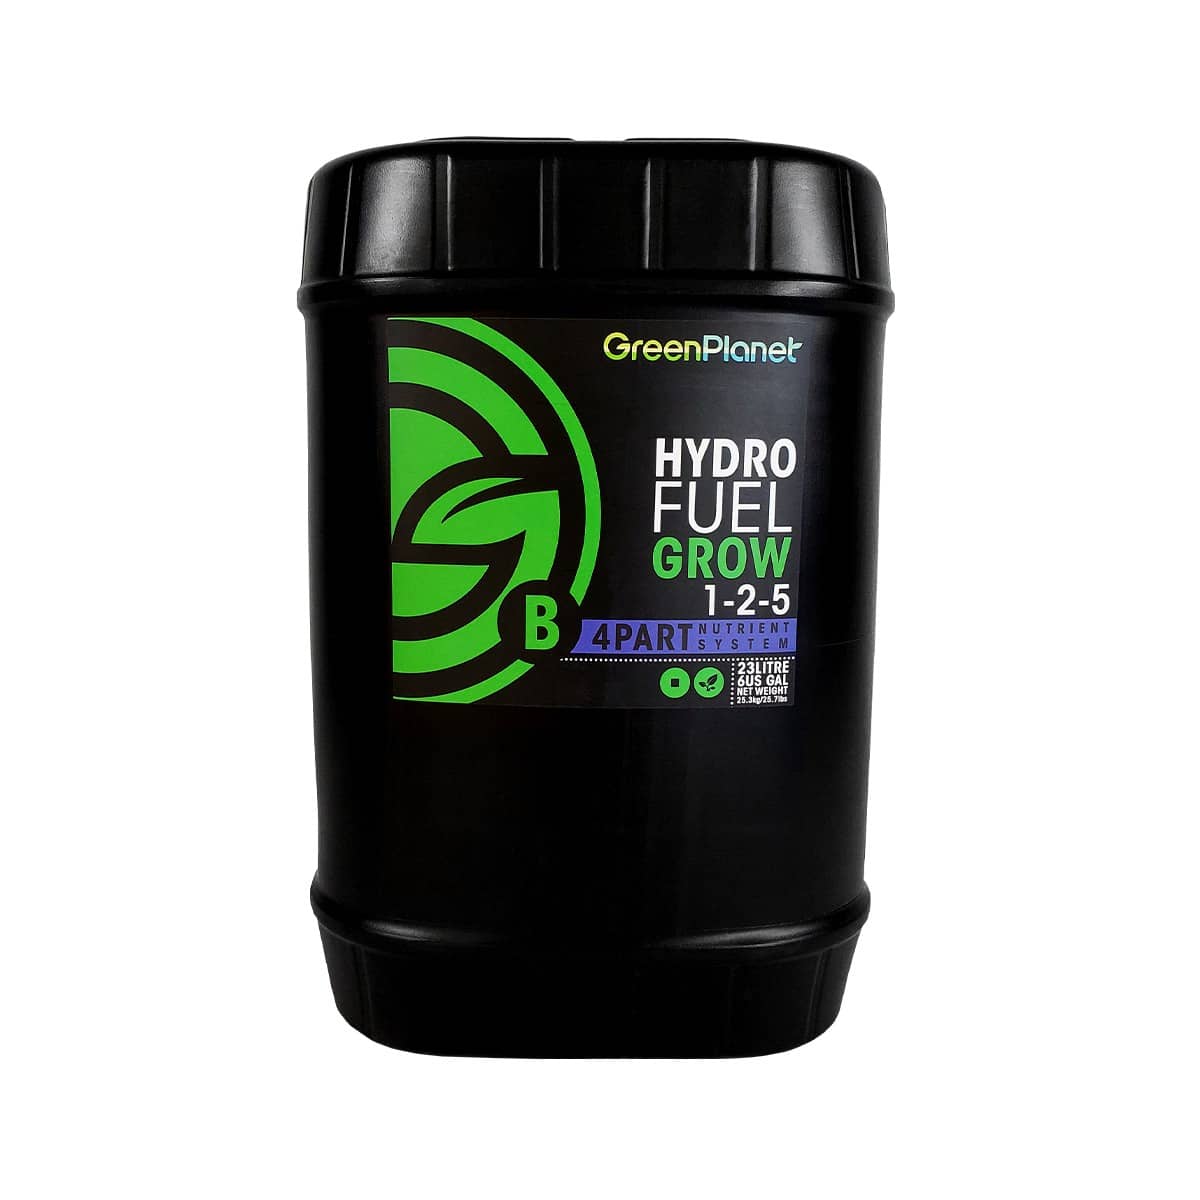 Product Image:GreenPlanet Hydro Fuel Grow Nutriments B (1-2-5)